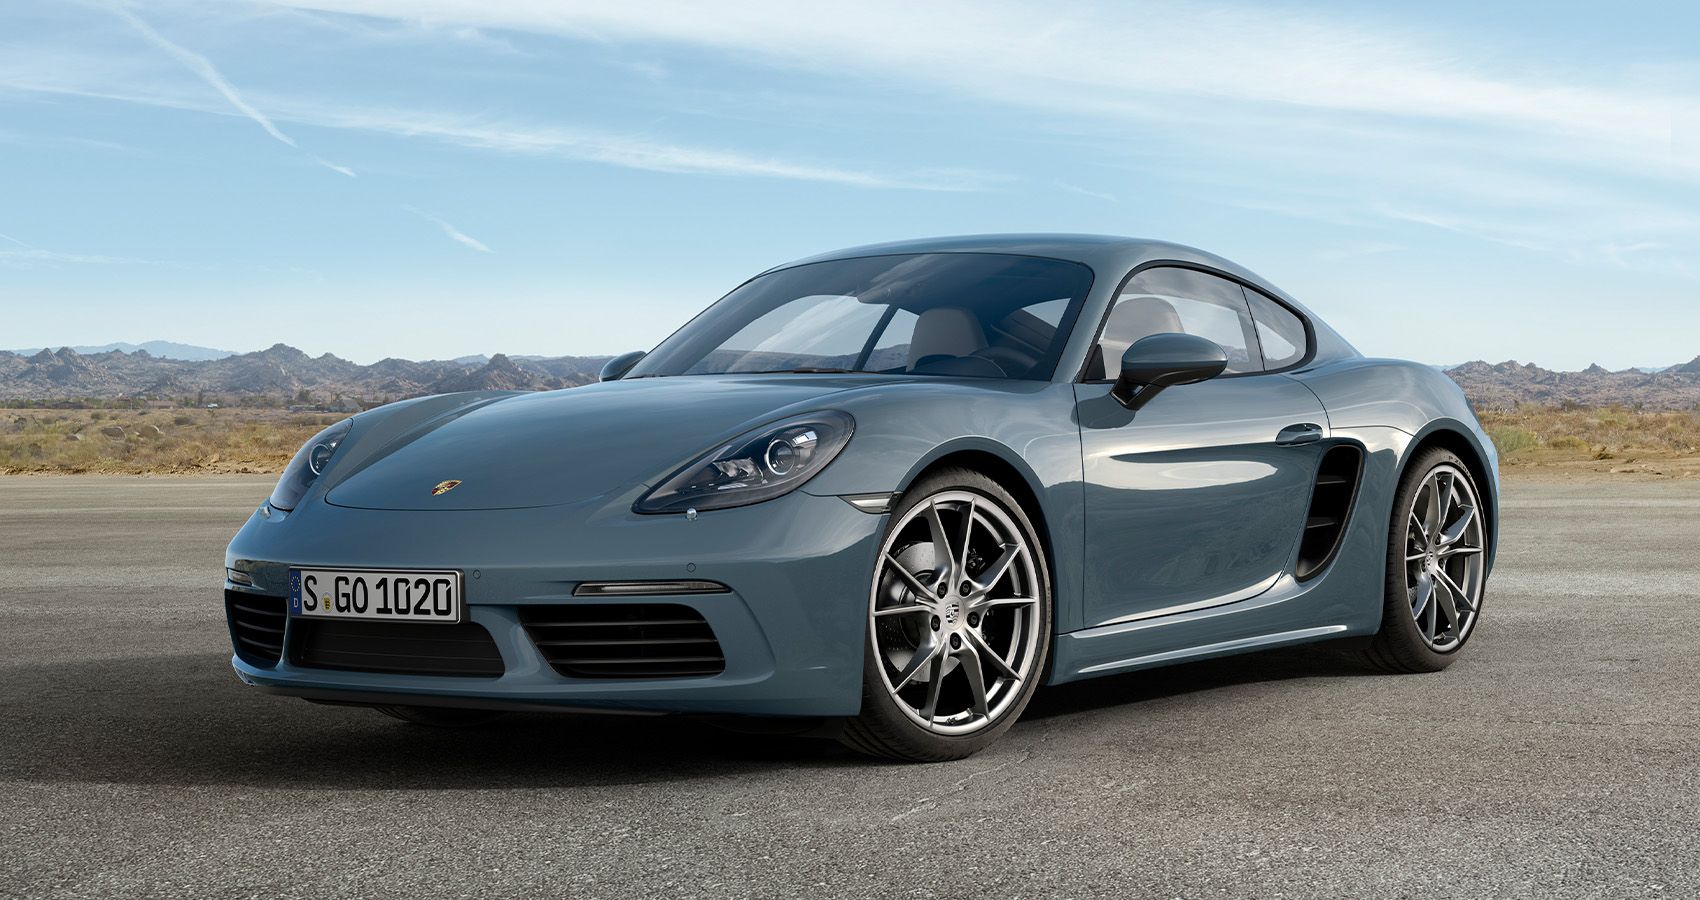 Front 3/4 view of the 718 Cayman in blue